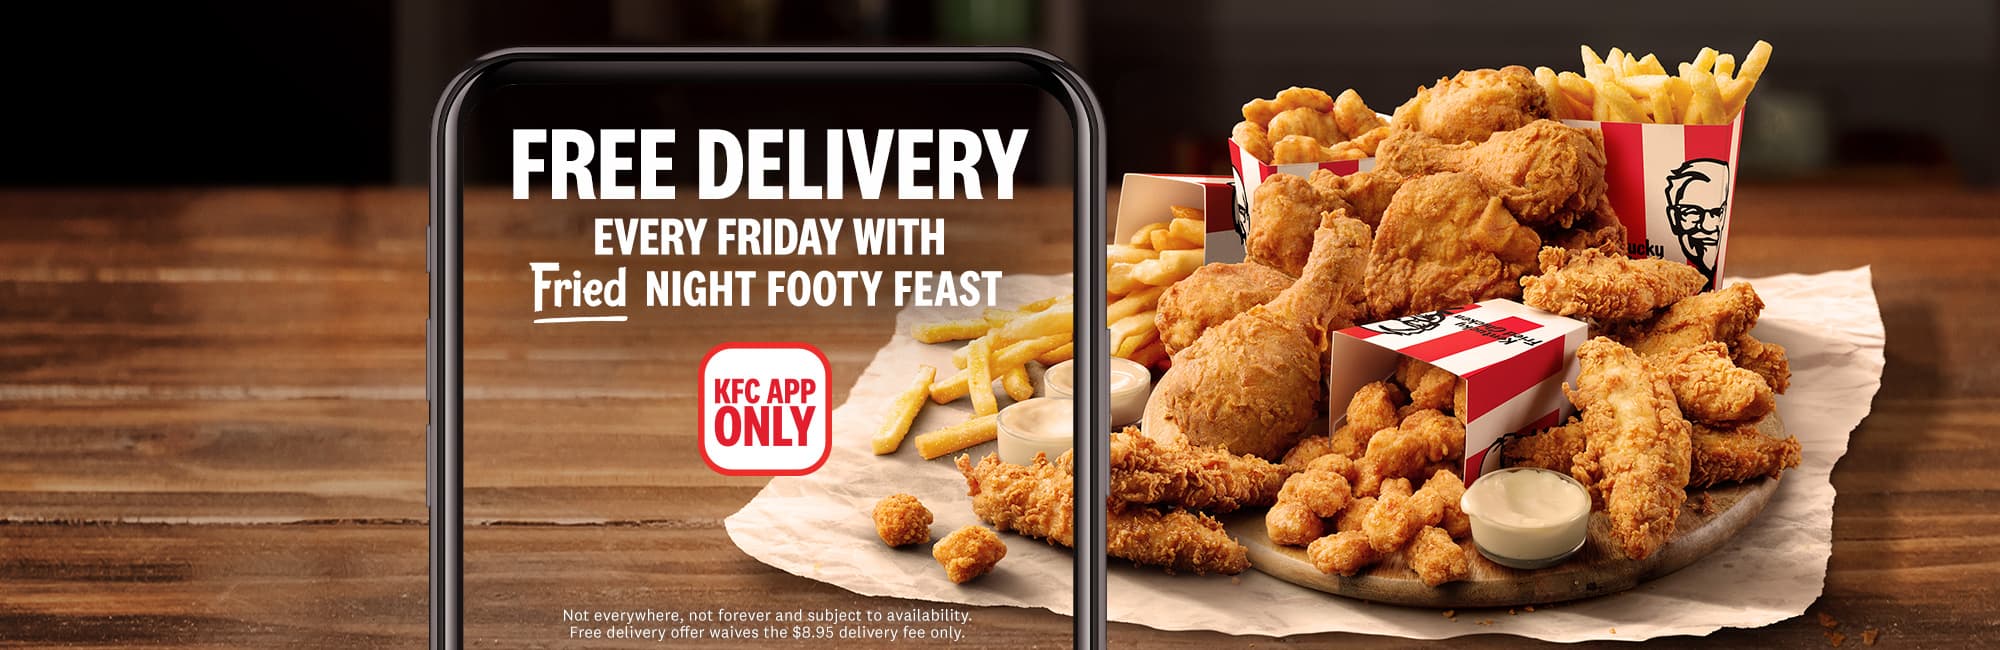 FREE DElivery every Friday with Fried Night Footy feast at KFC App only